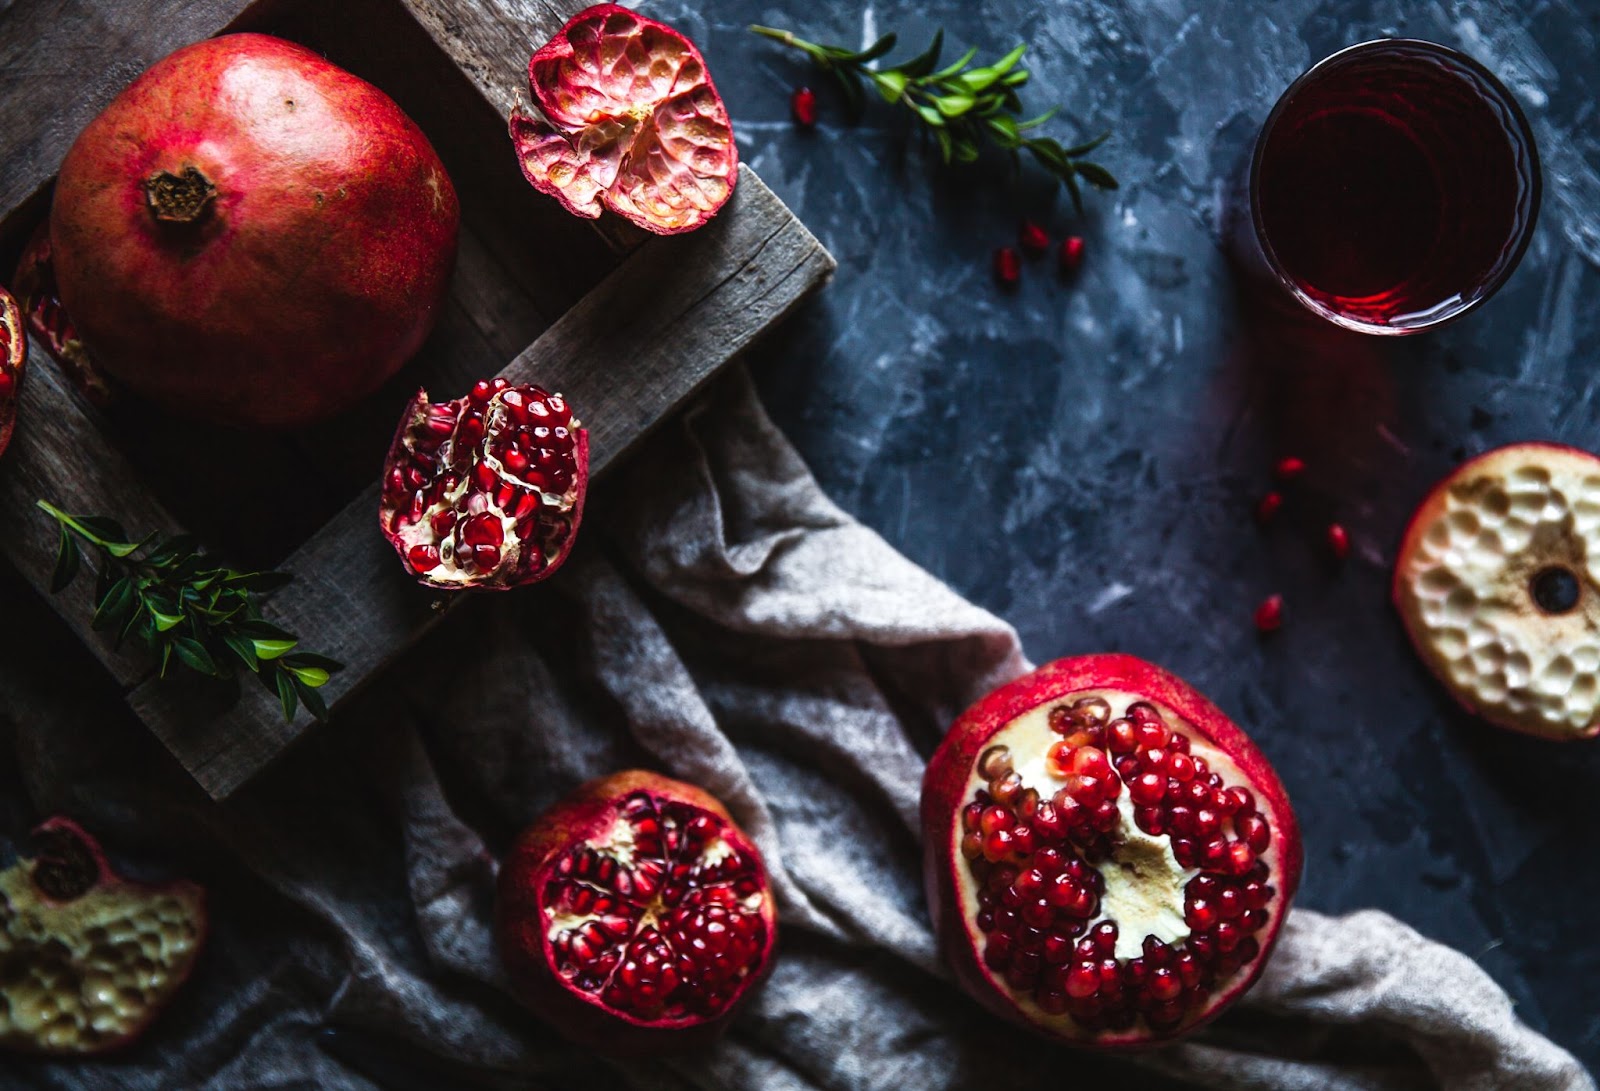 <p>Pomegranates, with their vibrant red arils resembling glistening jewels, are a nutritional treasure trove brimming with antioxidants, most notably punicalagins. These potent compounds are renowned for their remarkable anti-inflammatory and anti-aging properties, making pomegranates a valuable ally in the fight against cellular damage and the visible signs of aging.</p> <p>The benefits of these ruby-red fruits extend beyond their antioxidant prowess. Pomegranates have been linked to a reduced risk of heart disease, certain cancers, and arthritis. Enjoy the juicy arils as a delightful snack, sprinkle them over salads for a burst of flavor and color, or blend them into a refreshing smoothie for a nutritious and revitalizing treat.</p>